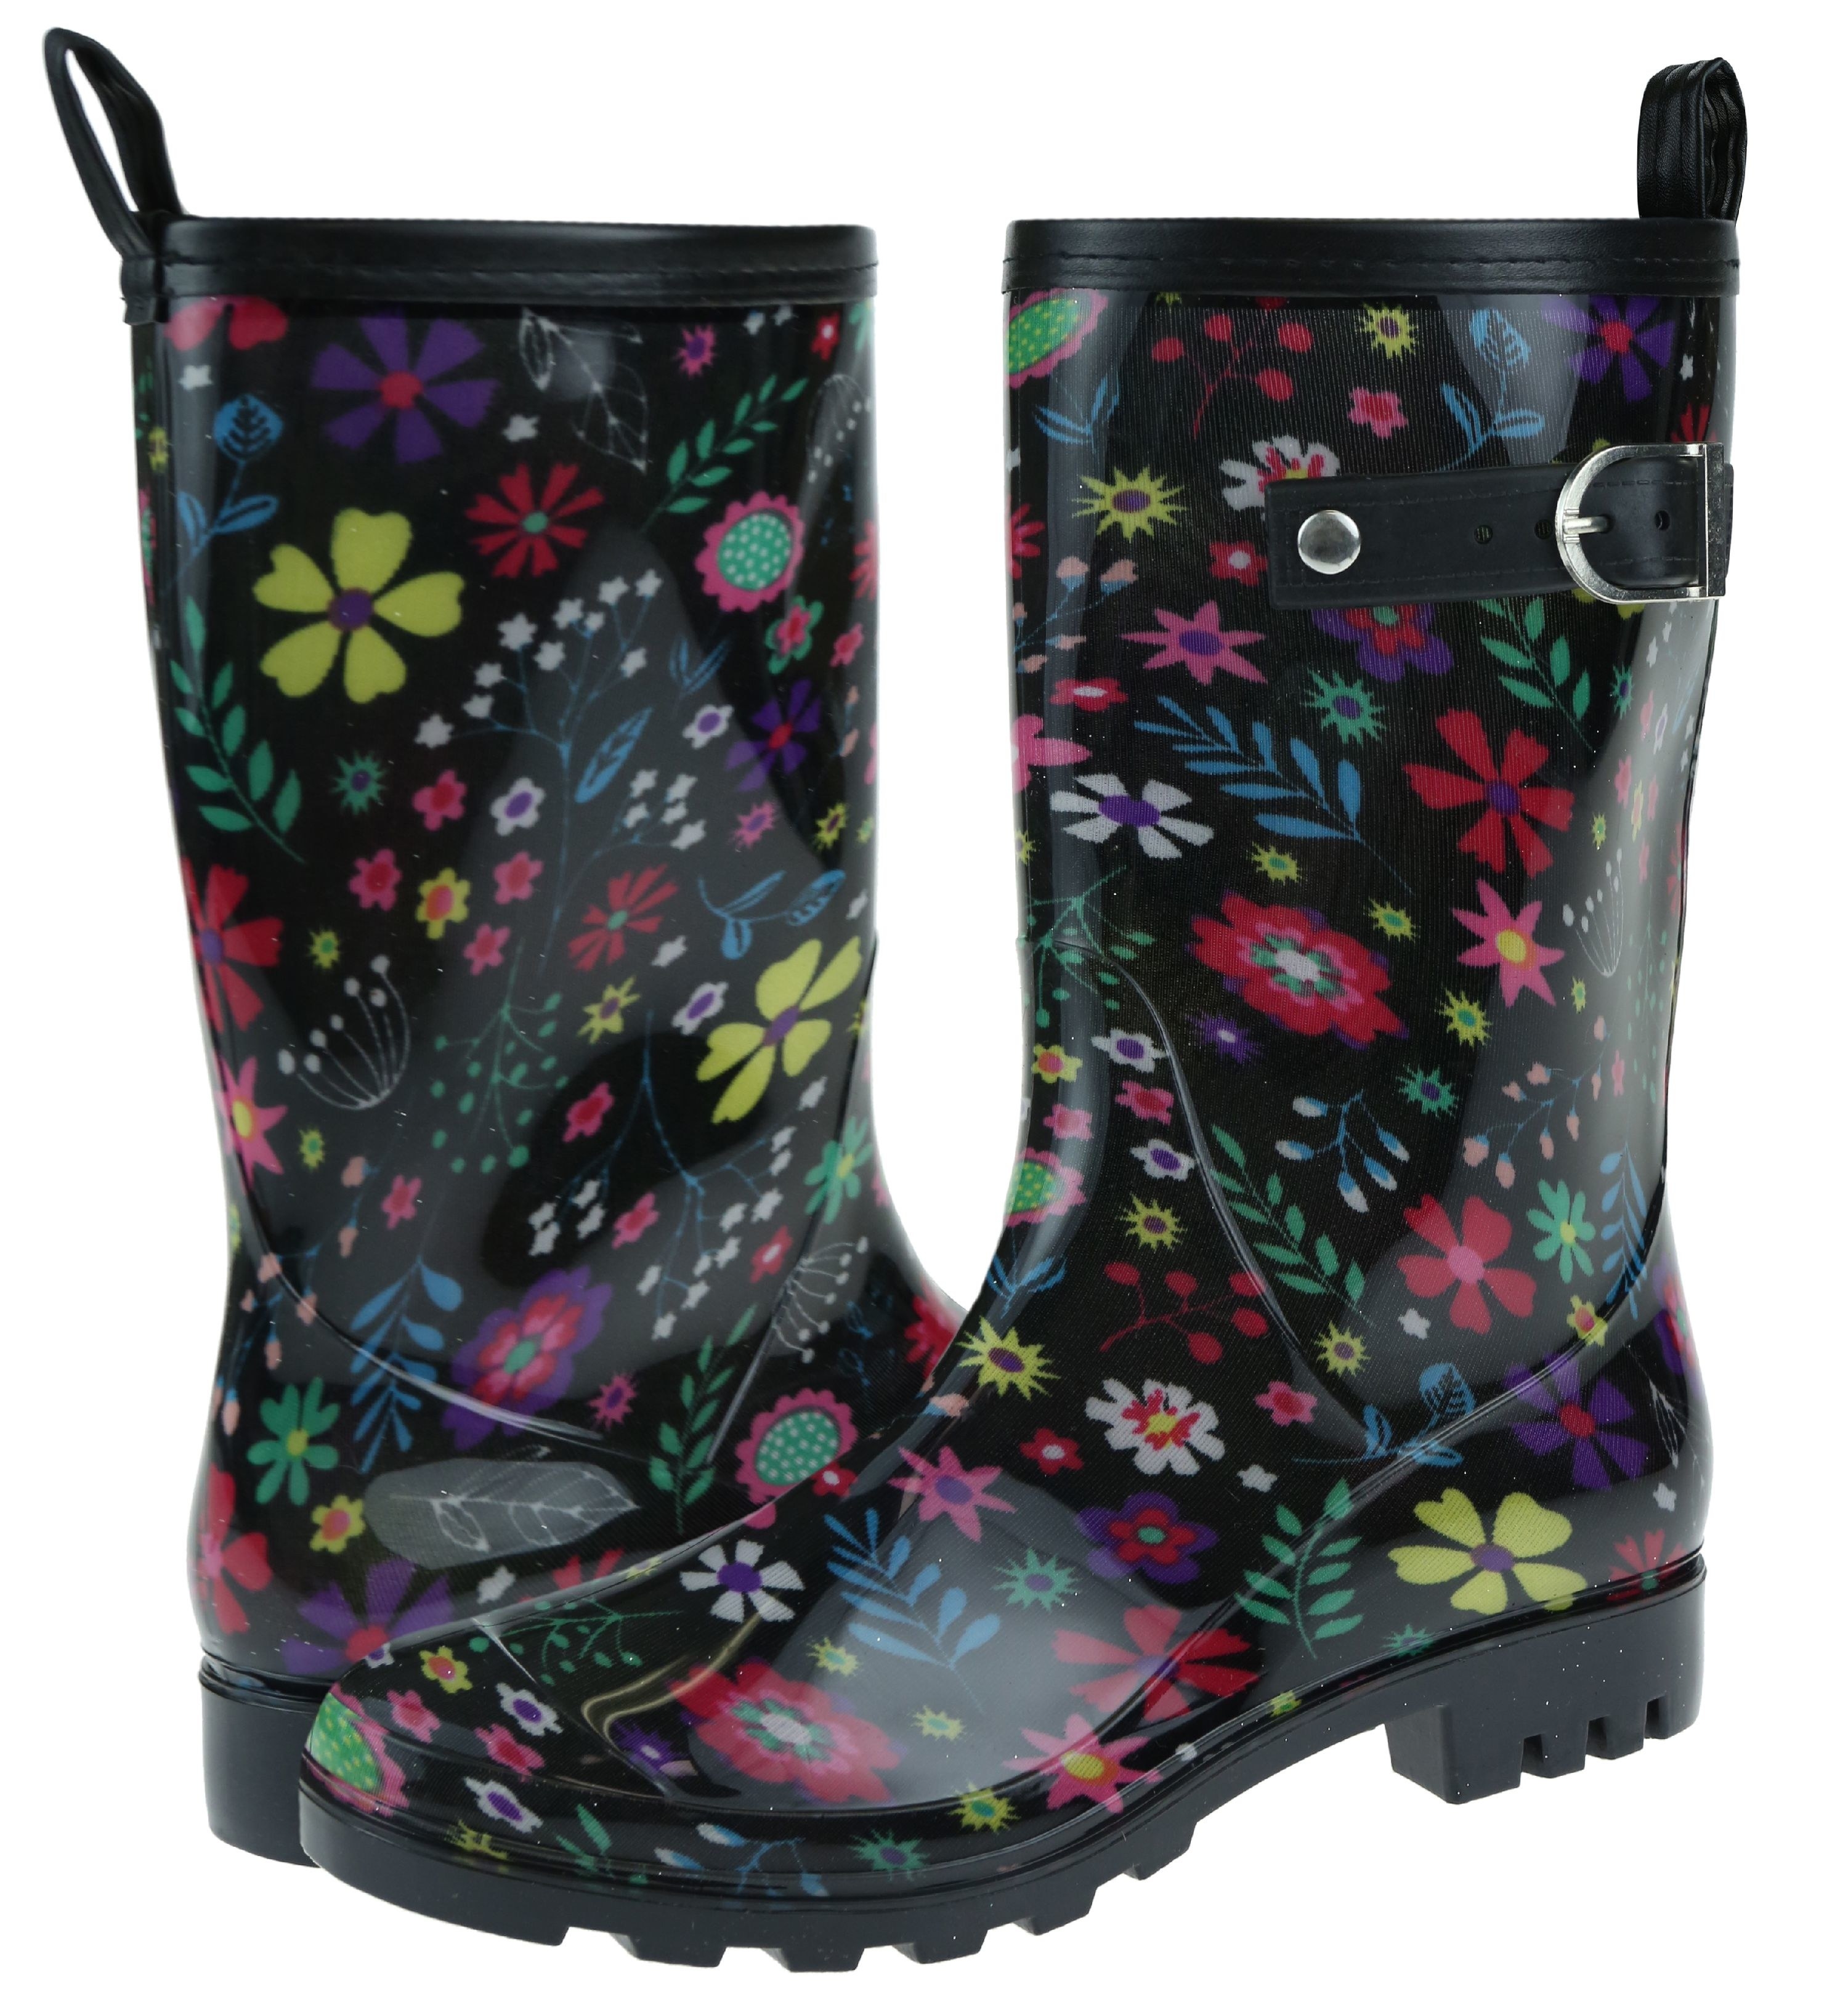 the black and floral rain boots